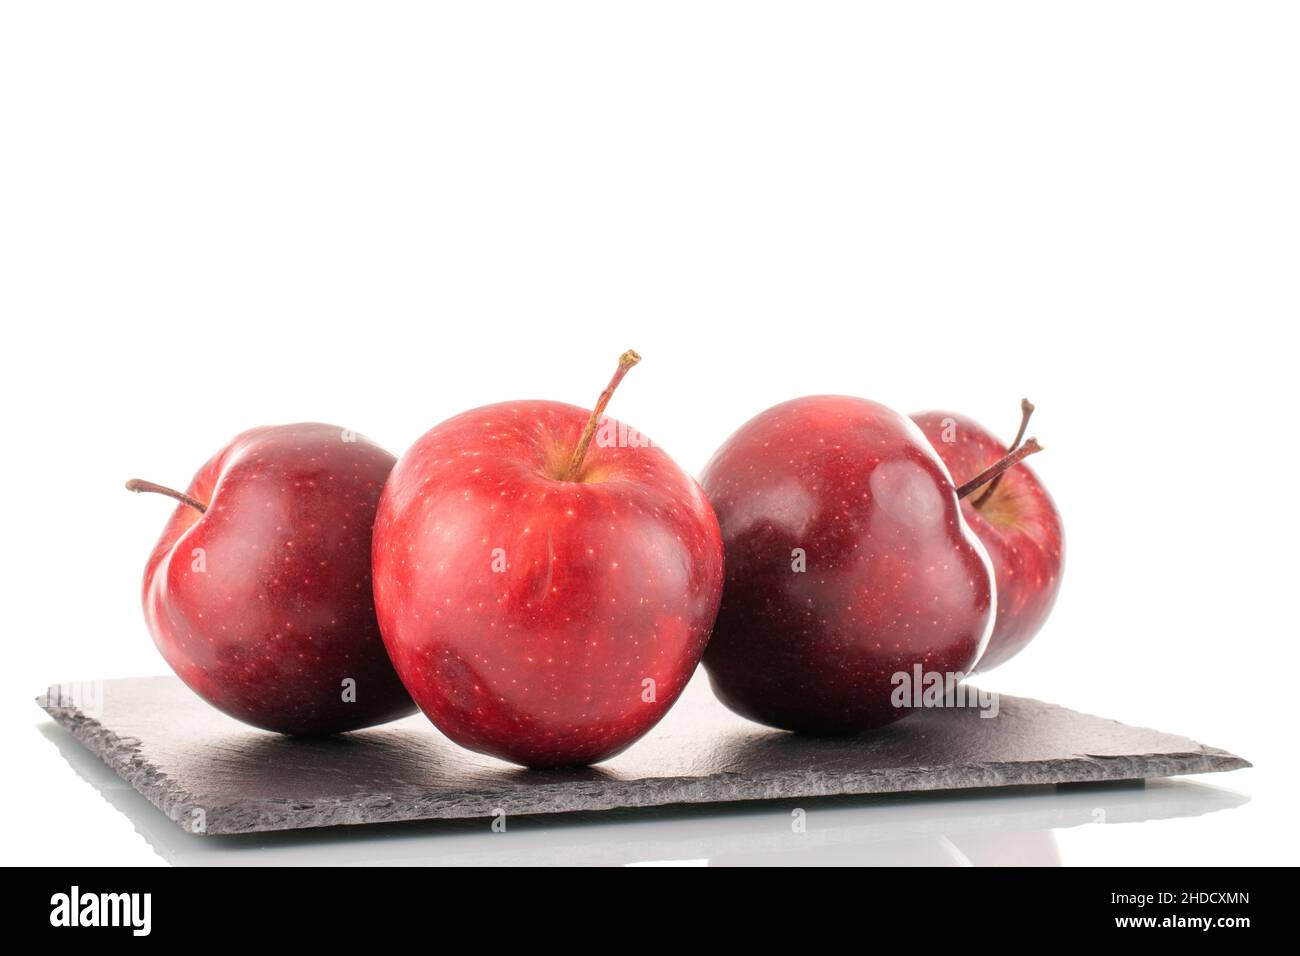 Four ripe sweet, red apples on a slate stone, close-up, isolated on white. Stock Photo